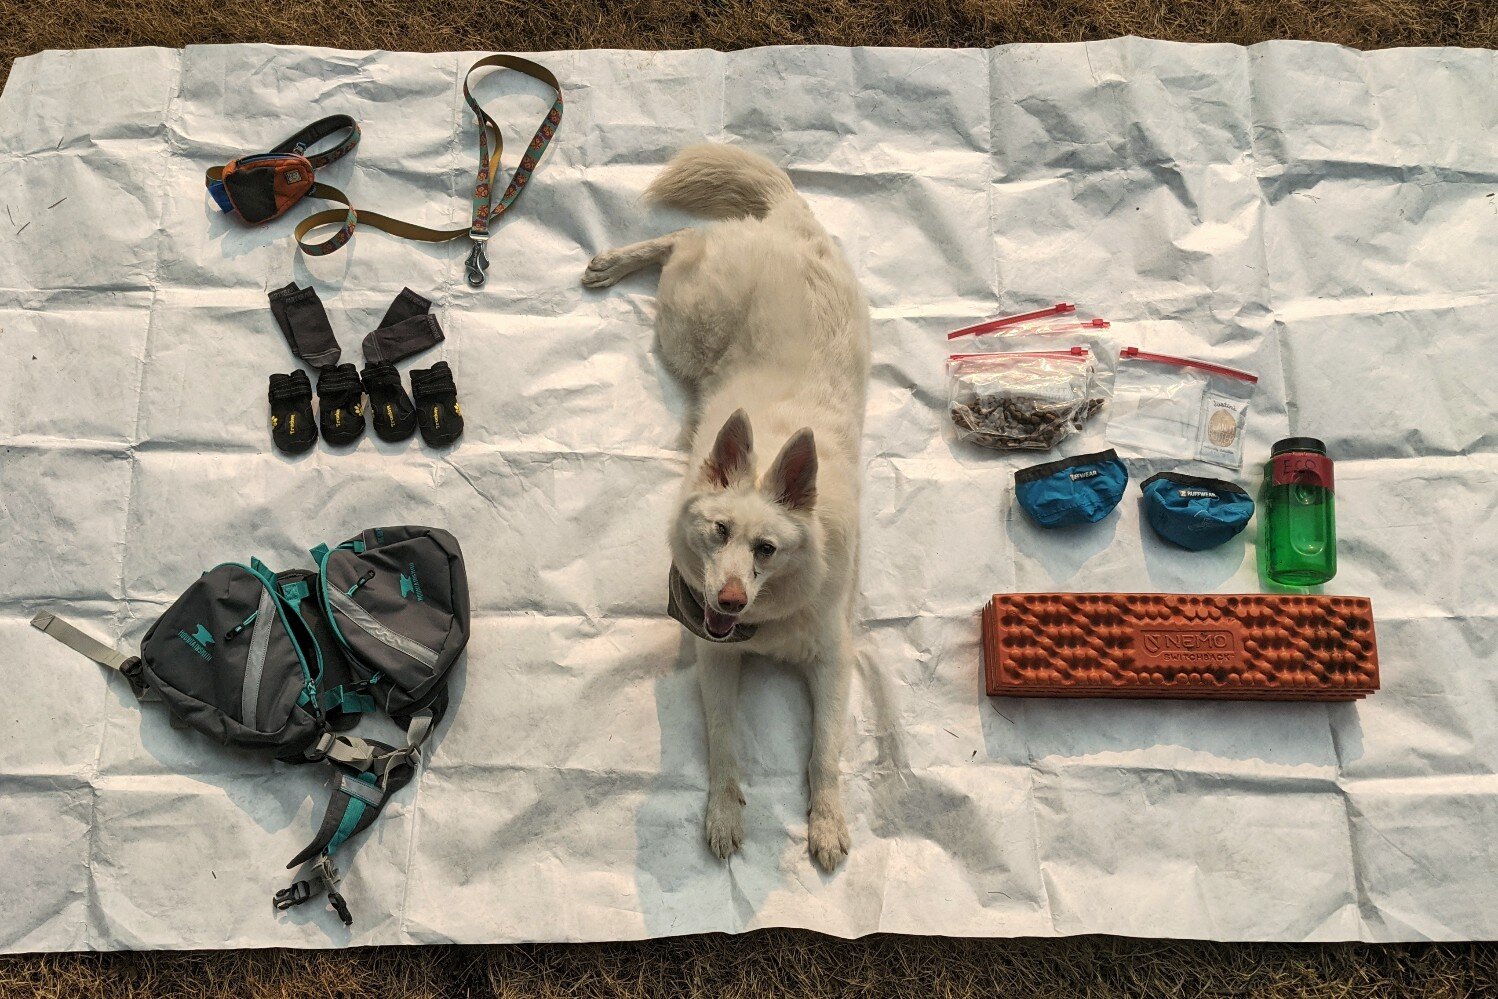 For backpacking, our dogs carry their bowls, treats, a few days worth of food, socks, and boots or Musher’s Wax (depending on terrain) in their backpack